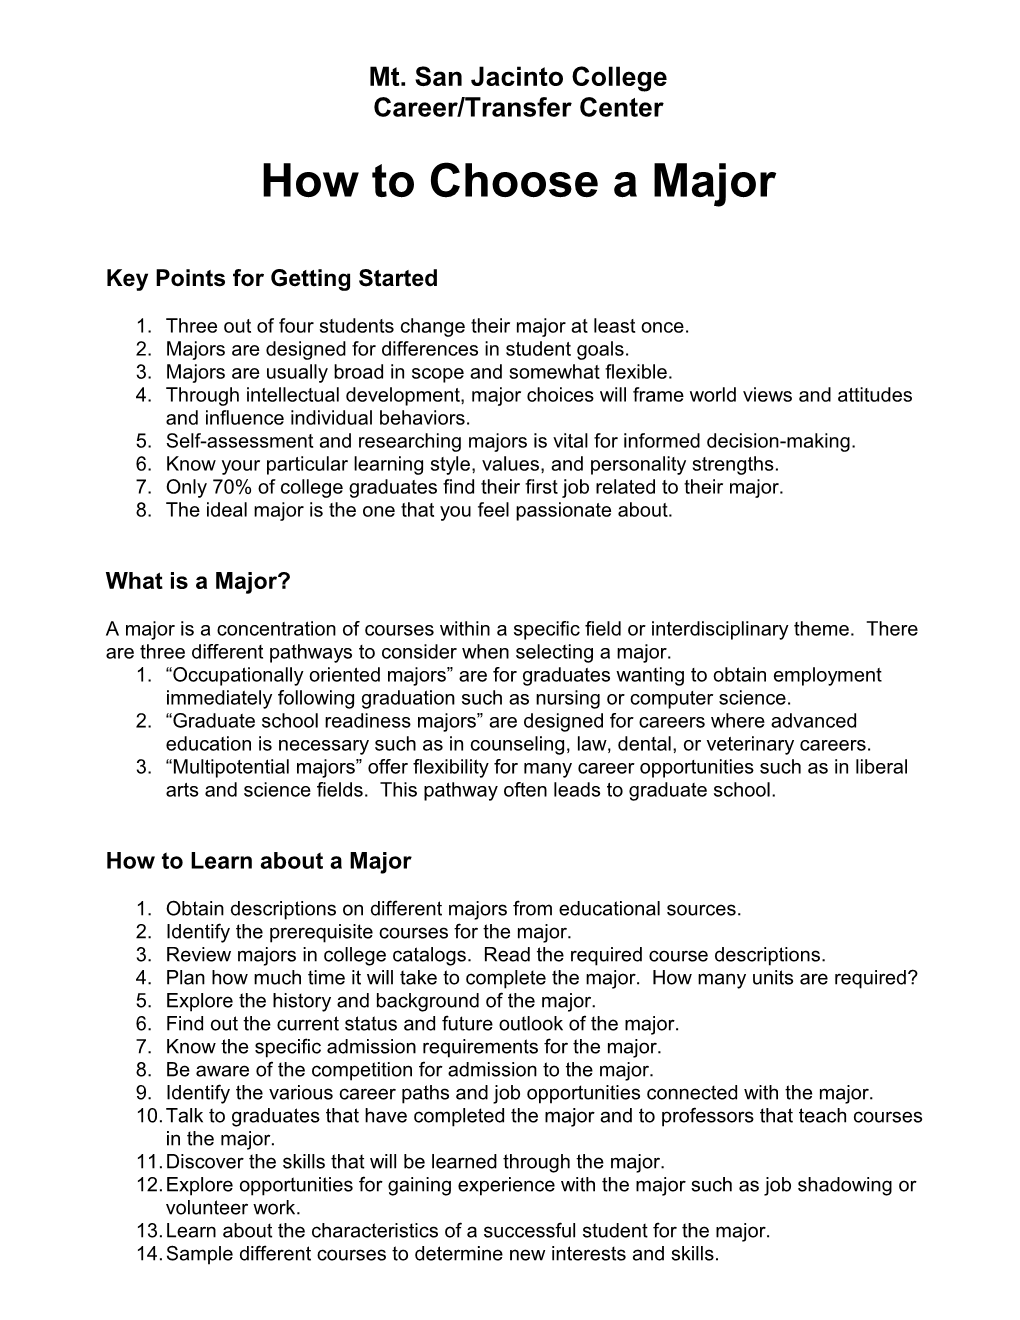 How to Choose a Major